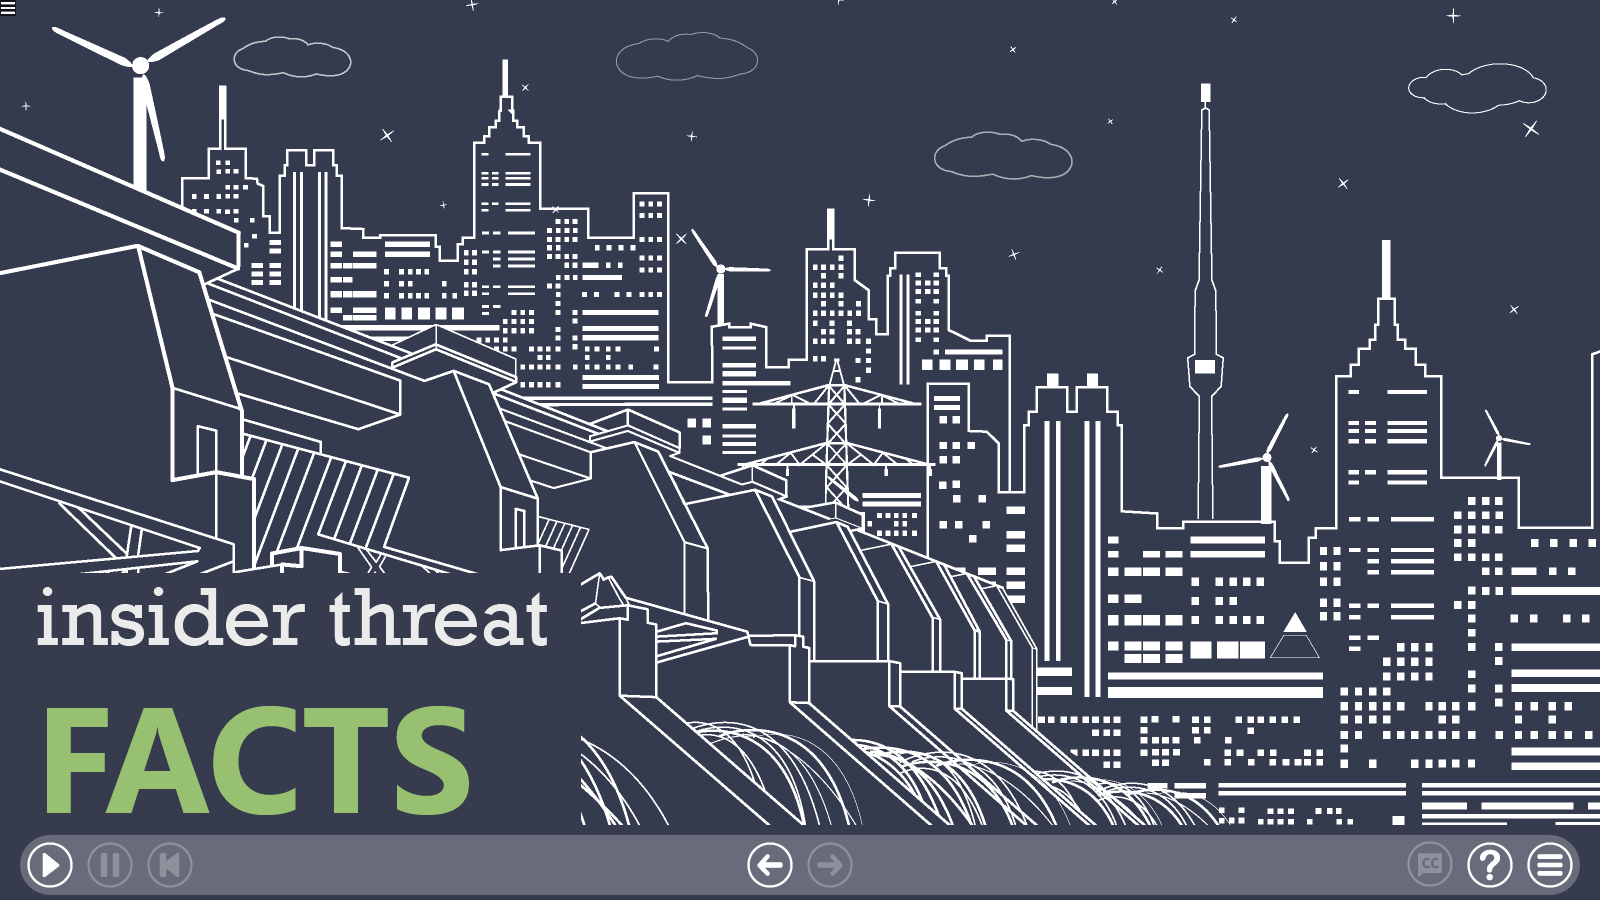 a title slide introducing facts about insider threats